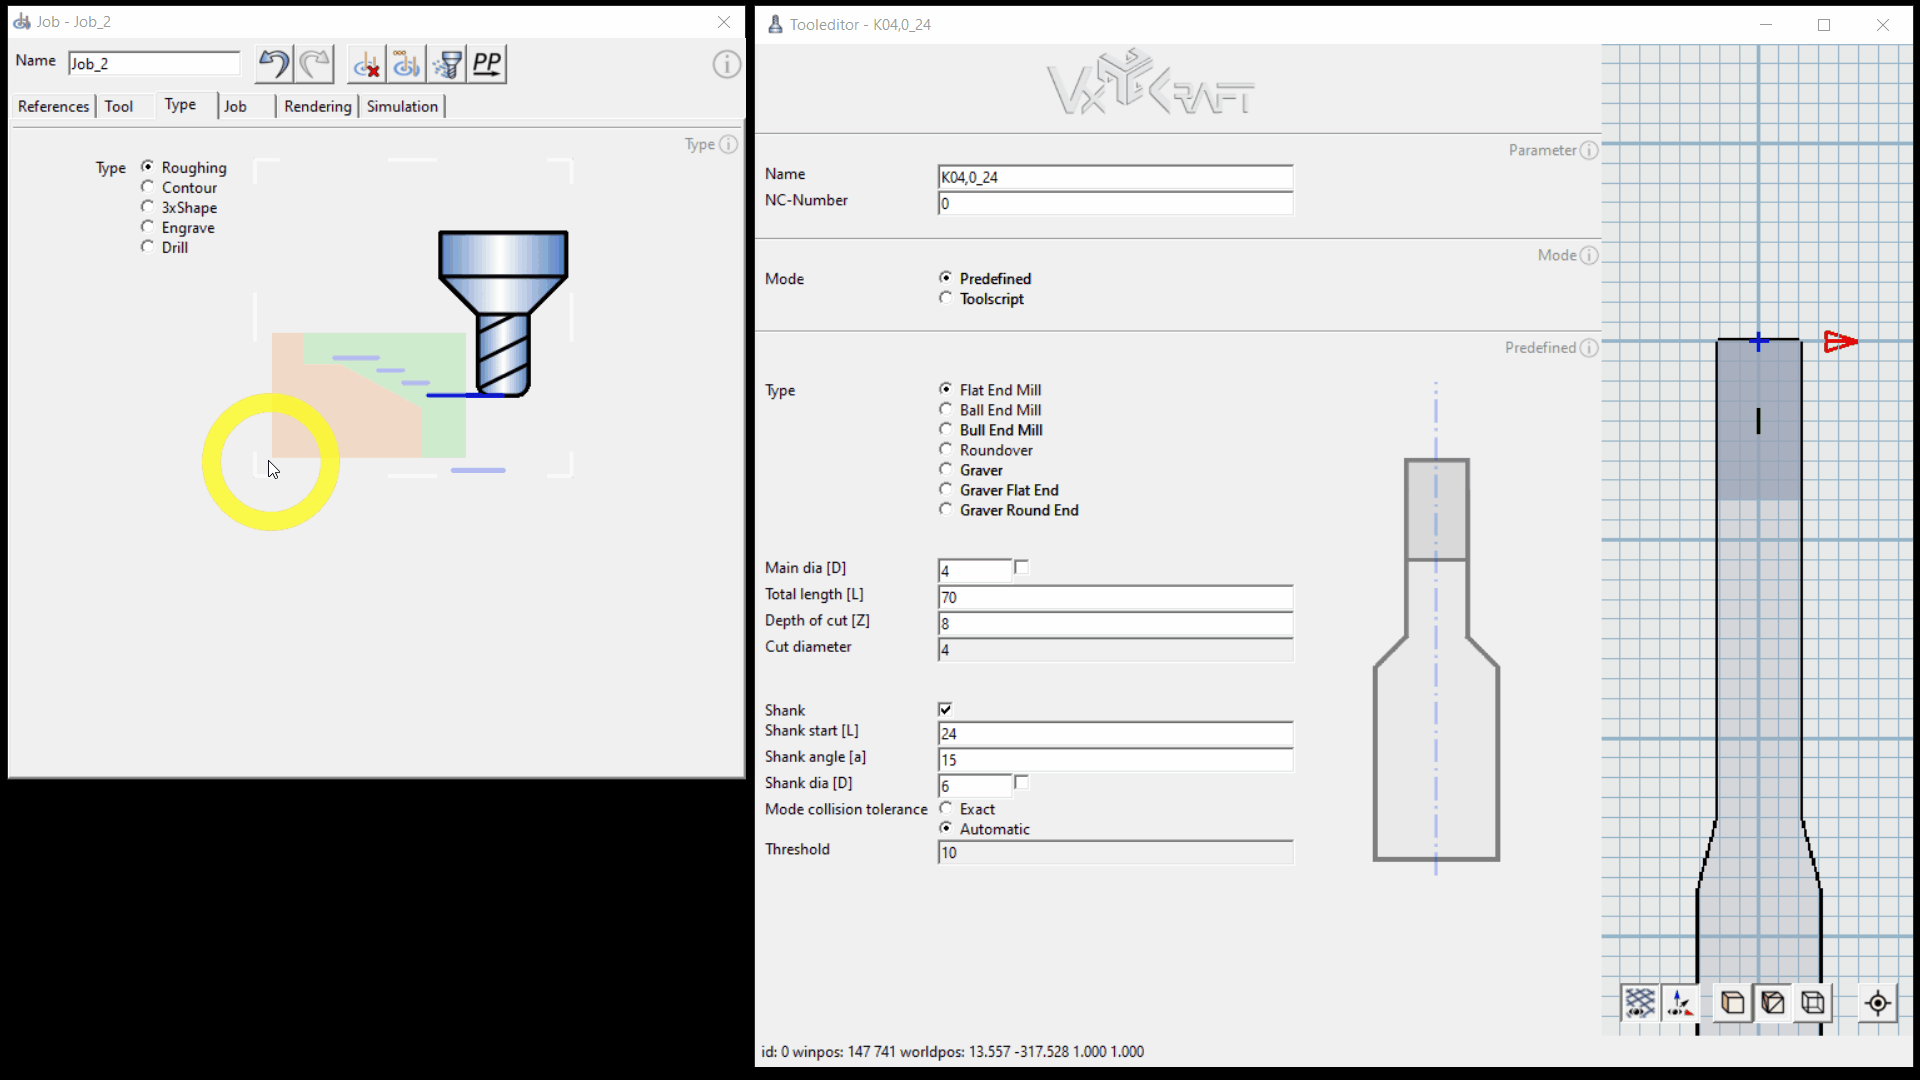 The animation shows various graphical animations that are integrated into the VxCraft user interface.